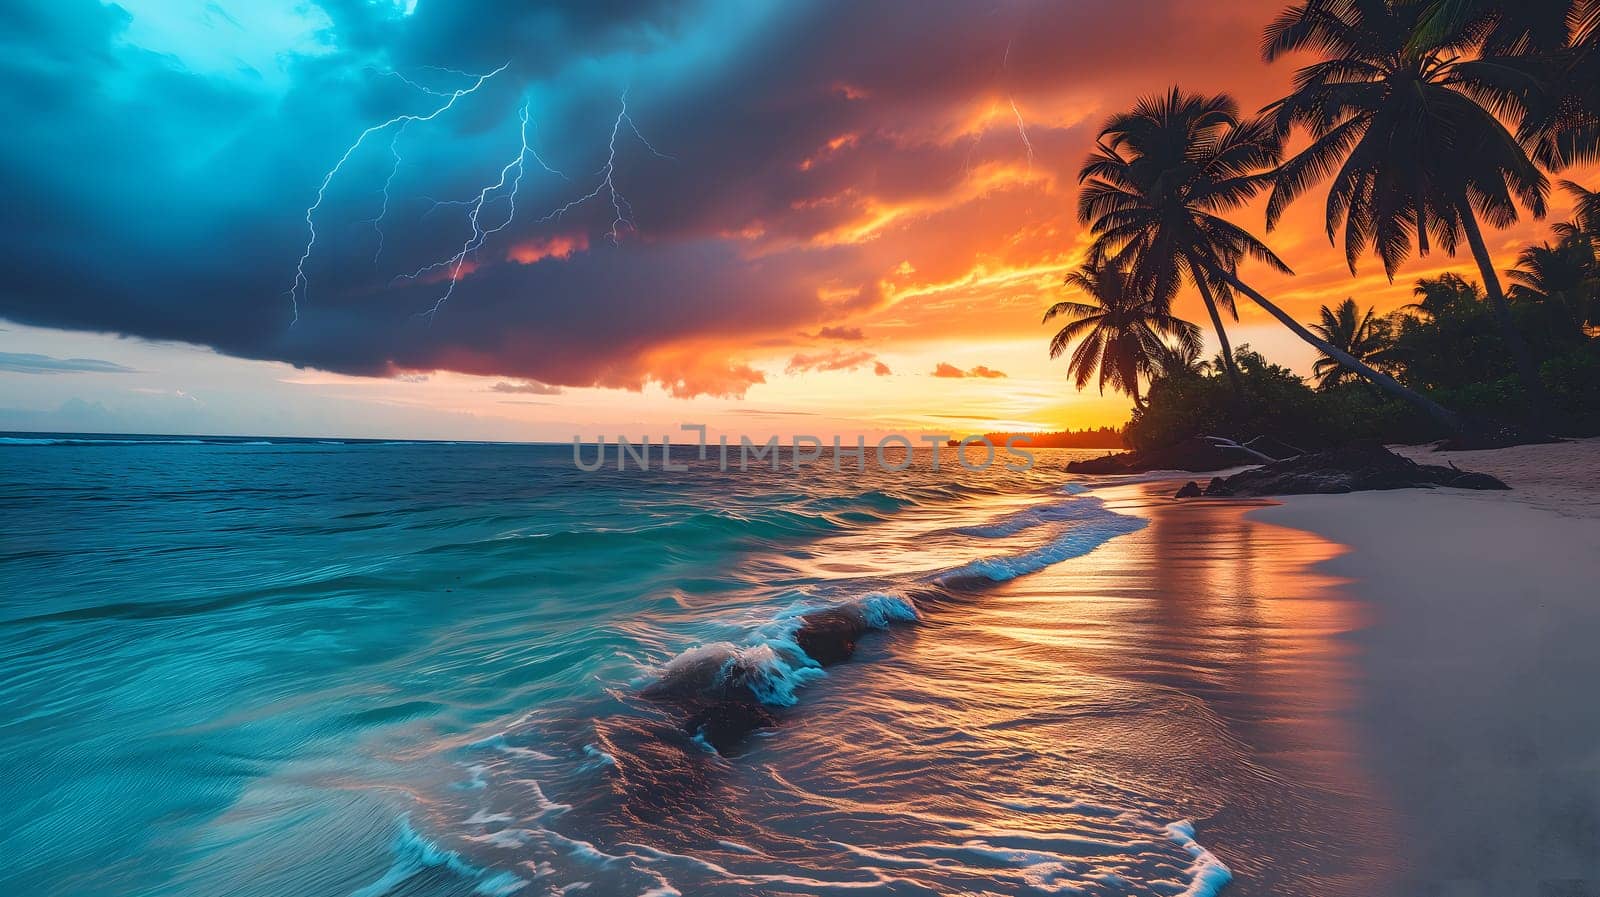 tropical beach view at cloudy stormy sunset with white sand, turquoise water and palm trees, neural network generated image by z1b